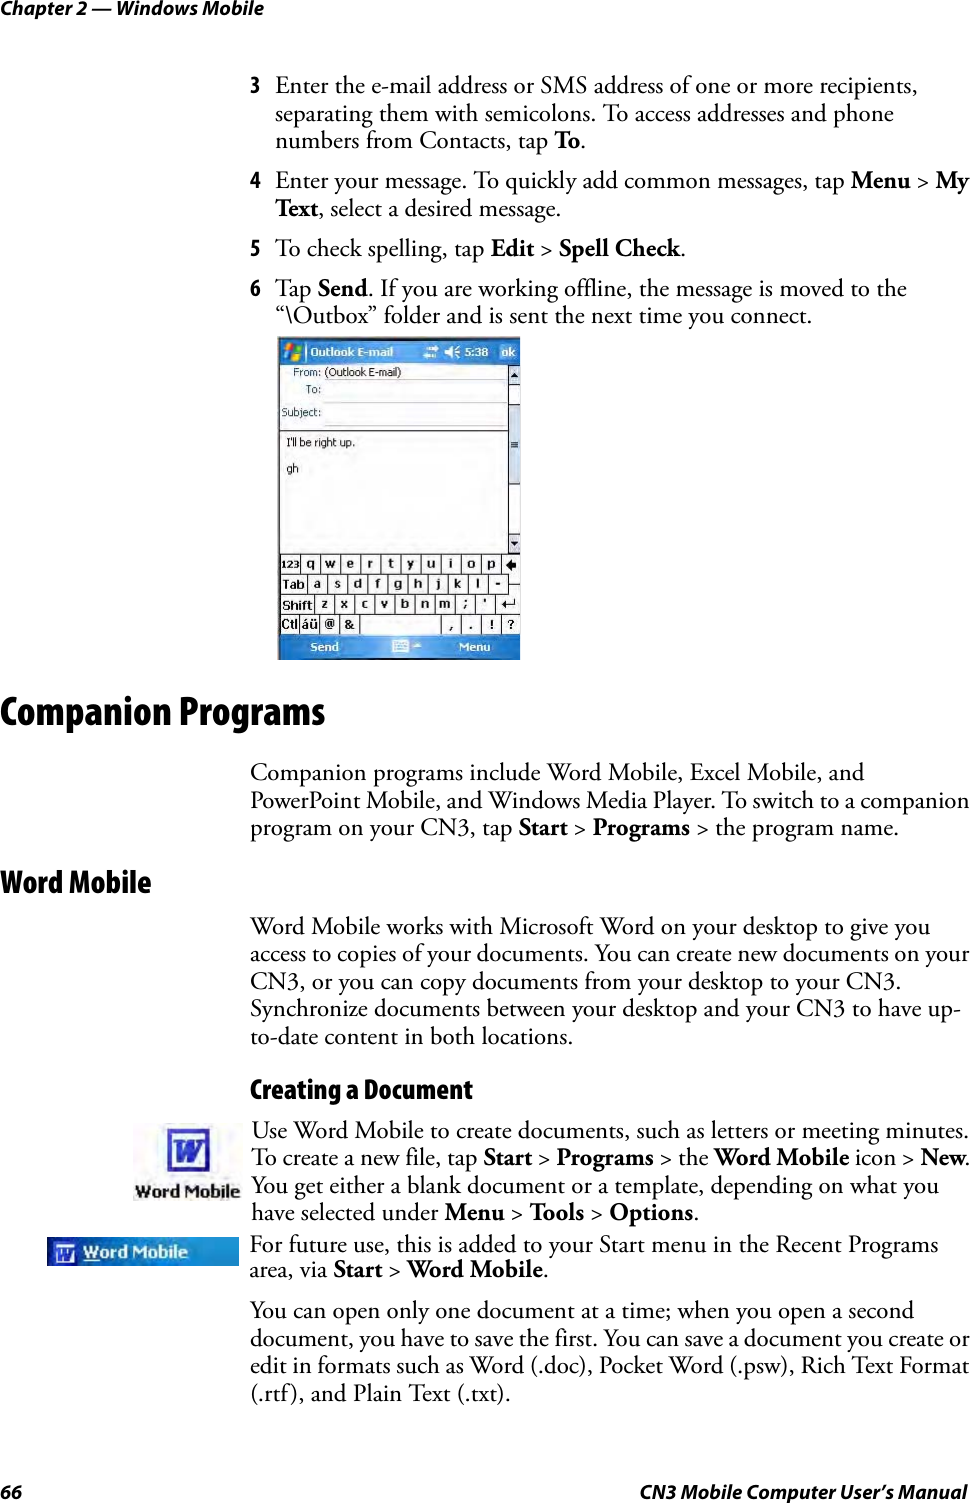 Chapter 2 — Windows Mobile66 CN3 Mobile Computer User’s Manual3Enter the e-mail address or SMS address of one or more recipients, separating them with semicolons. To access addresses and phone numbers from Contacts, tap To.4Enter your message. To quickly add common messages, tap Menu &gt; My Tex t , select a desired message.5To check spelling, tap Edit &gt; Spell Check.6Tap  Send. If you are working offline, the message is moved to the “\Outbox” folder and is sent the next time you connect.Companion ProgramsCompanion programs include Word Mobile, Excel Mobile, and PowerPoint Mobile, and Windows Media Player. To switch to a companion program on your CN3, tap Start &gt; Programs &gt; the program name.Word MobileWord Mobile works with Microsoft Word on your desktop to give you access to copies of your documents. You can create new documents on your CN3, or you can copy documents from your desktop to your CN3. Synchronize documents between your desktop and your CN3 to have up-to-date content in both locations.Creating a DocumentYou can open only one document at a time; when you open a second document, you have to save the first. You can save a document you create or edit in formats such as Word (.doc), Pocket Word (.psw), Rich Text Format (.rtf), and Plain Text (.txt).Use Word Mobile to create documents, such as letters or meeting minutes. To create a new file, tap Start &gt; Programs &gt; the Word Mobile icon &gt; New. You get either a blank document or a template, depending on what you have selected under Menu &gt; Tools &gt; Options.For future use, this is added to your Start menu in the Recent Programs area, via Start &gt; Word Mobile. 